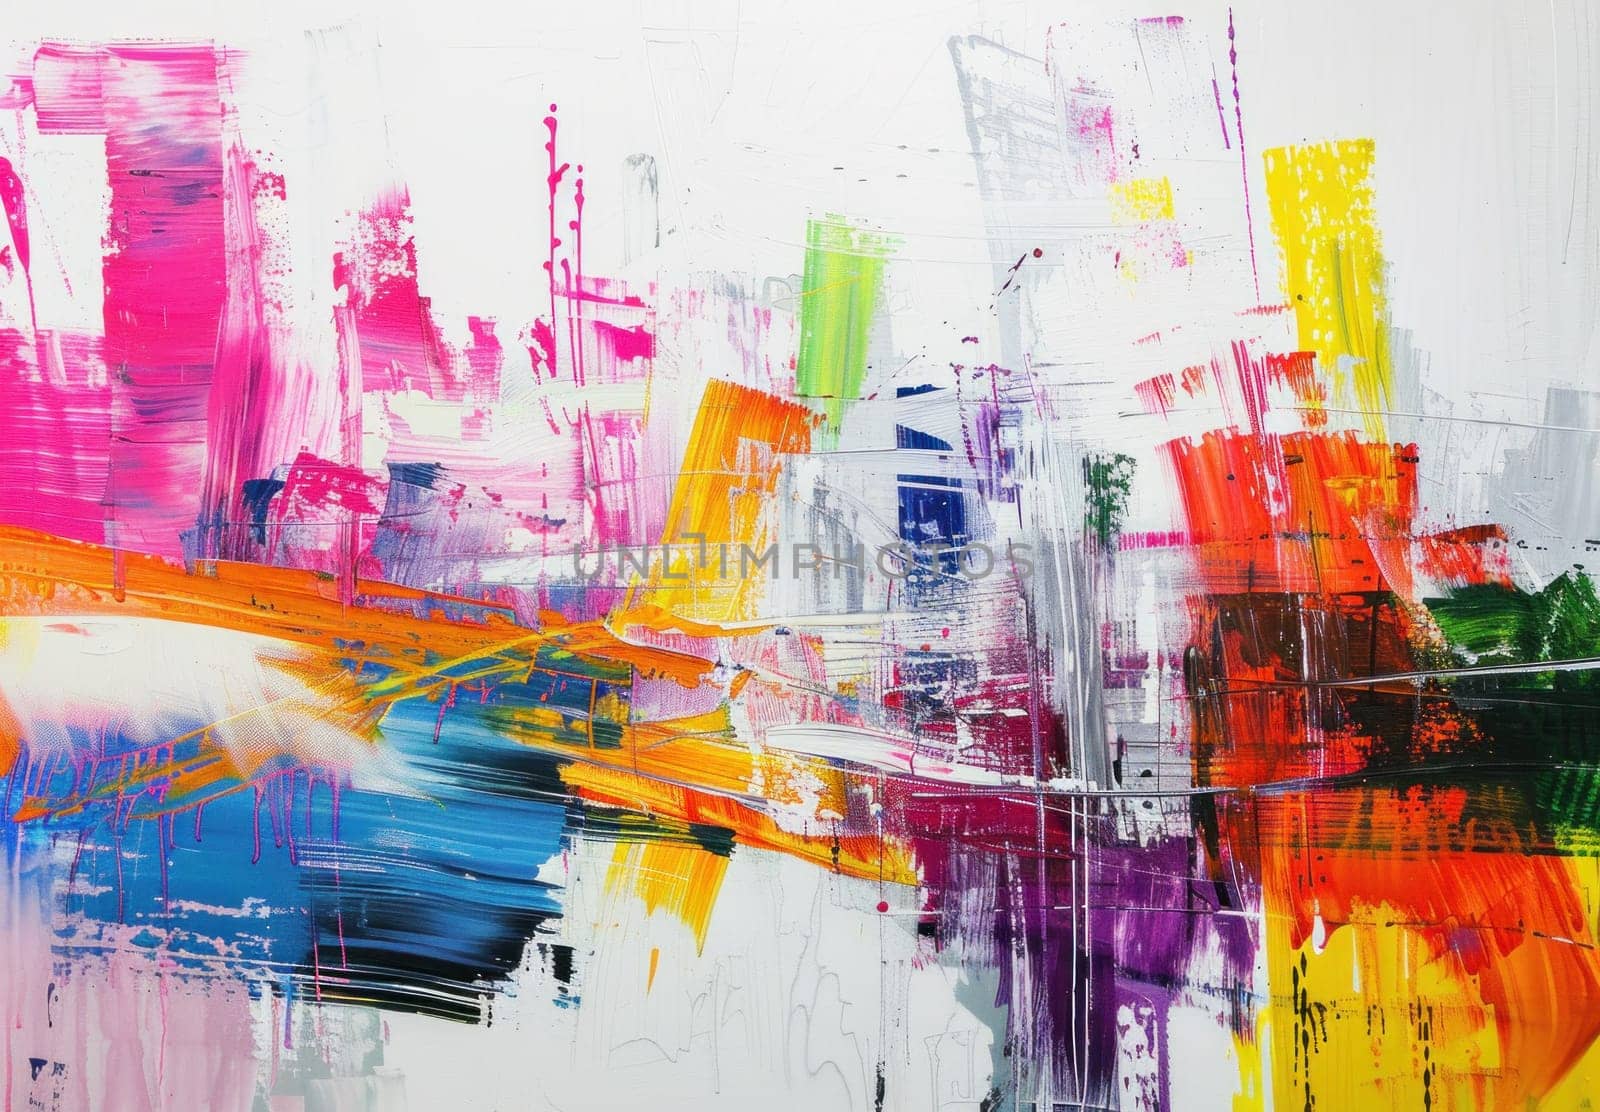 Colorful abstract painting of a vibrant cityscape with bright red, yellow, green, and blue shades inspired by urban life